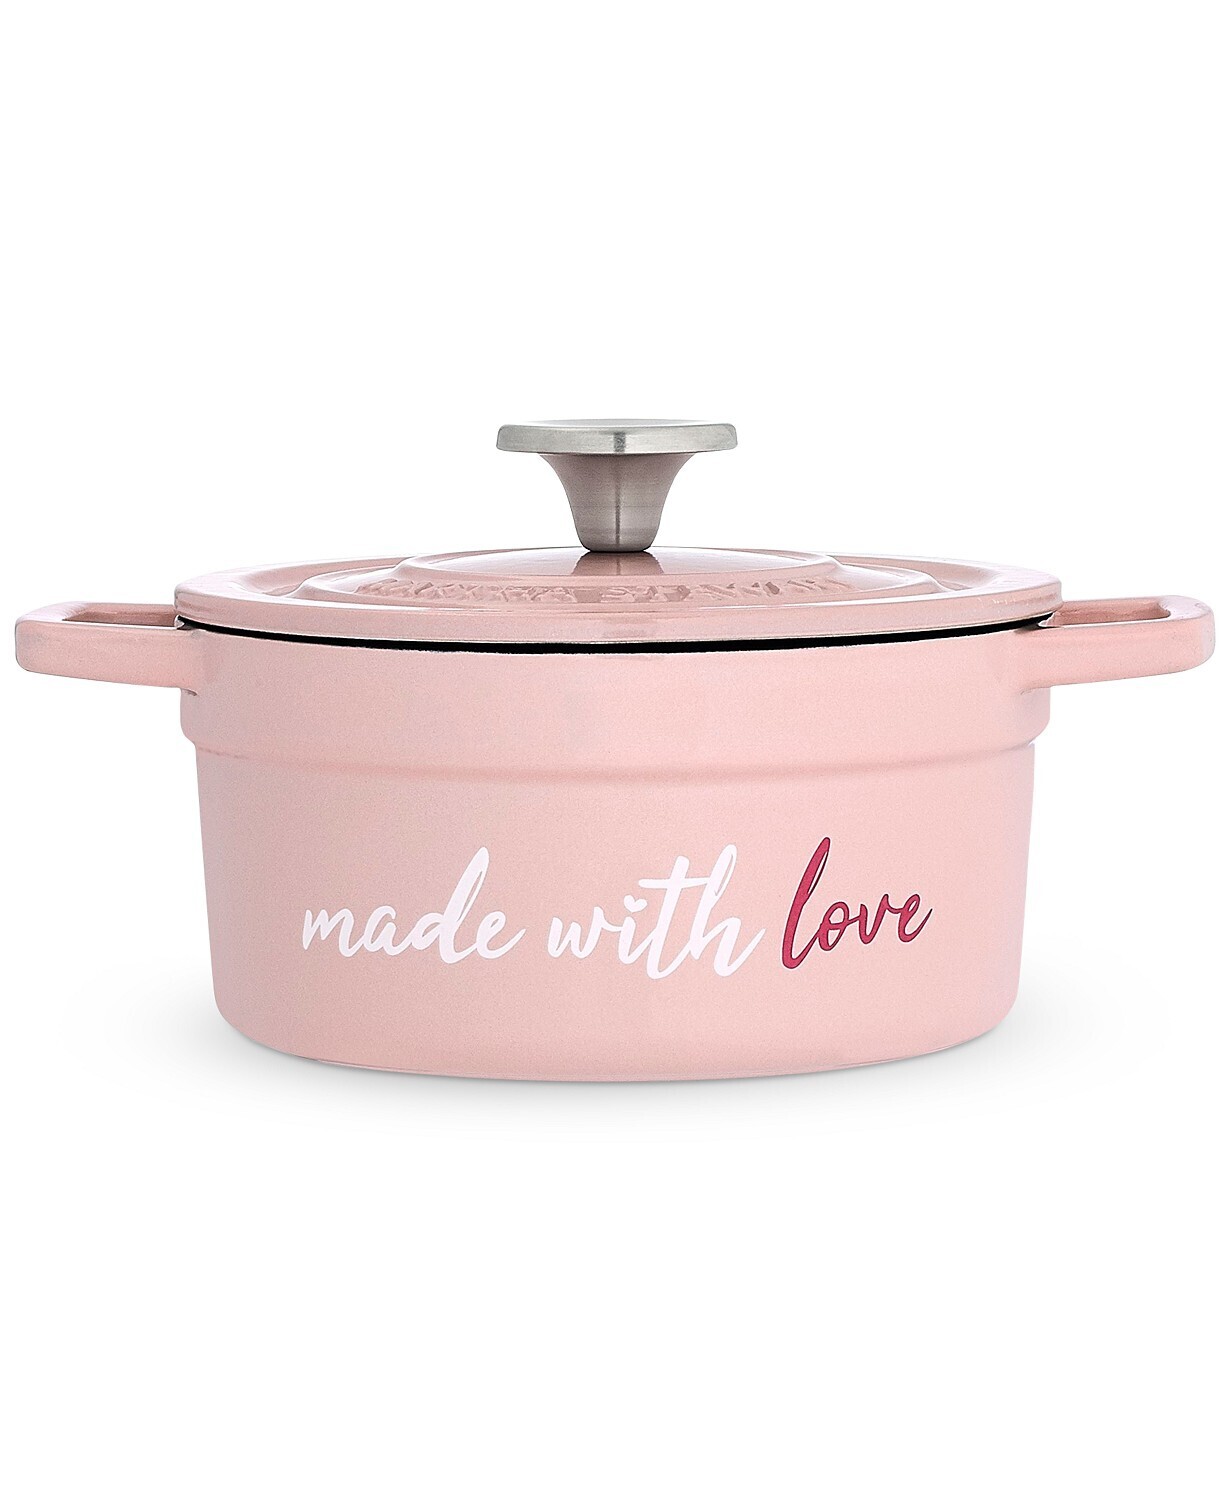 Martha Stewart Collection Made with Love 2-Qt. Enameled Cast Iron Dutch Oven